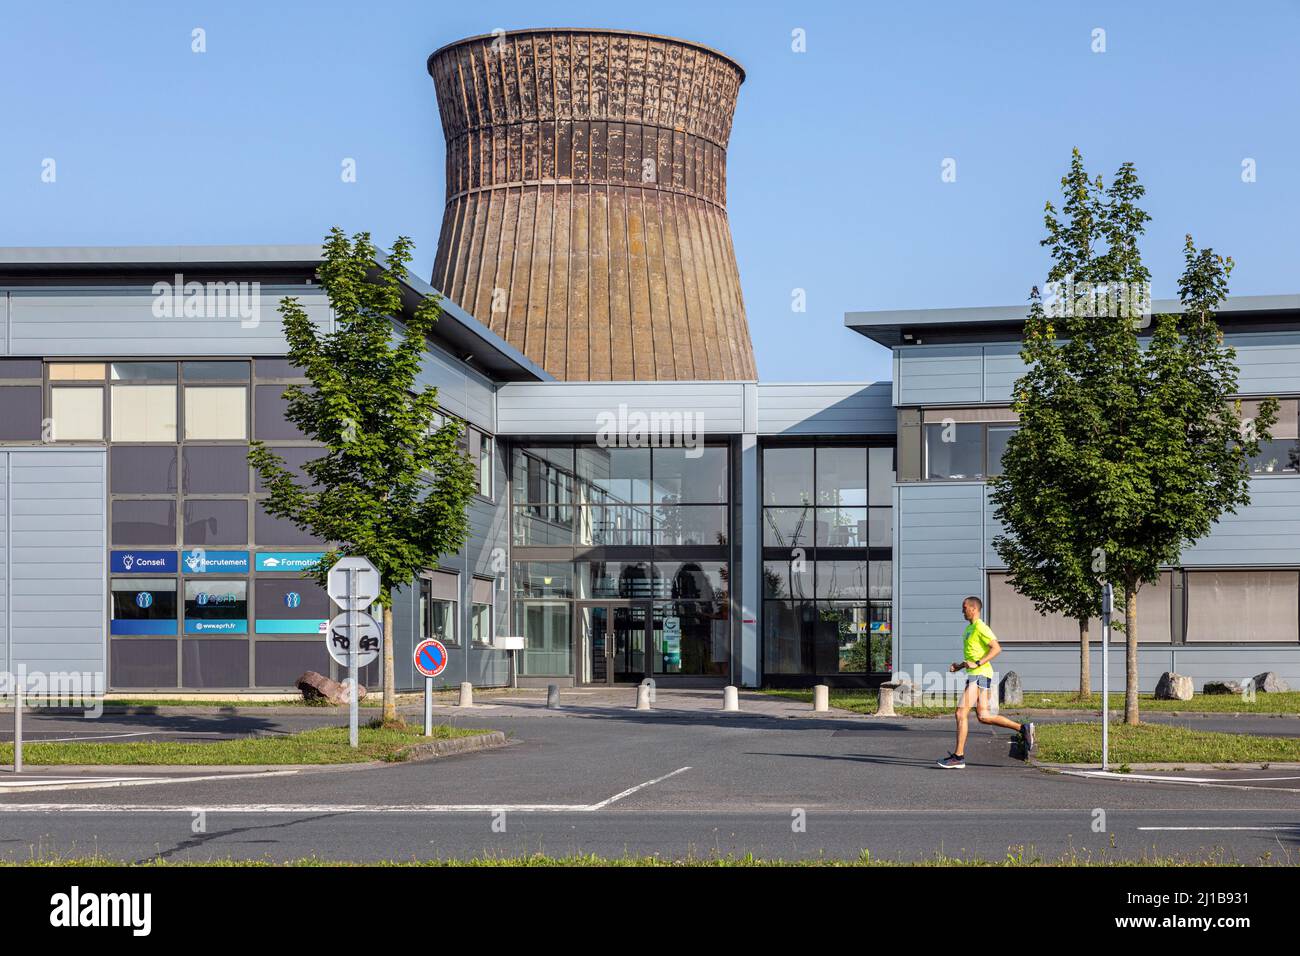 NORMANDIAL SMALL-BUSINESS PARK ON THE SITE OF THE FORMER METALLURGICAL CORPORATION OF NORMANDY (SMN) WHERE A COOLING TOWER STILL STANDS, CAEN, COLOMBELLES, CALVADOS, NORMANDY, FRANCE Stock Photo